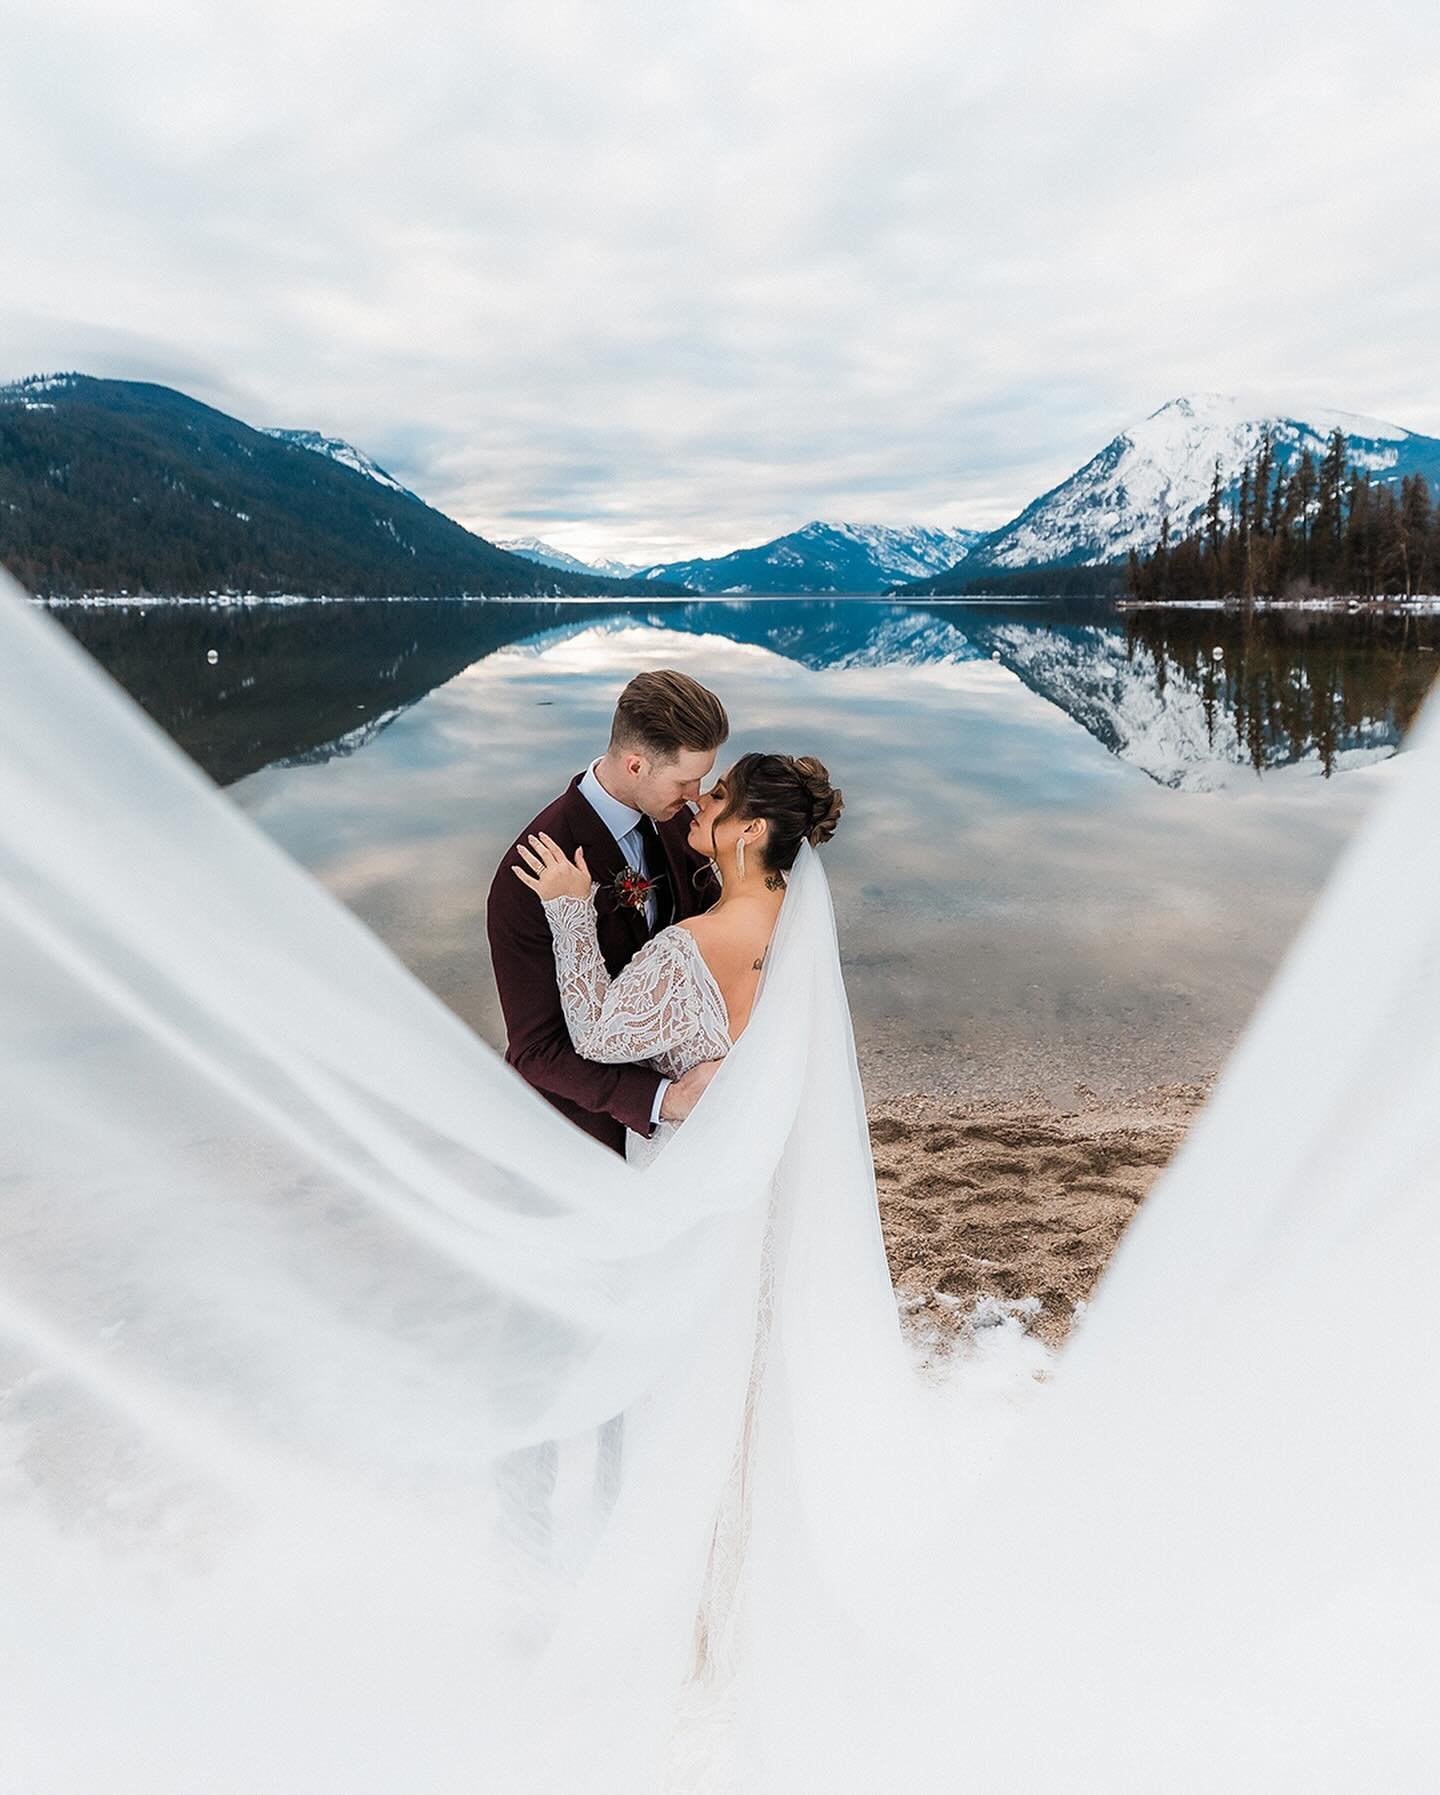 D &amp; J chose the charm of an A-frame cabin for their special day, surrounded by their closest family members. With just their 4 beloved cousins, the atmosphere was filled with love and intimacy. Two cousins officiated the ceremony, while the other